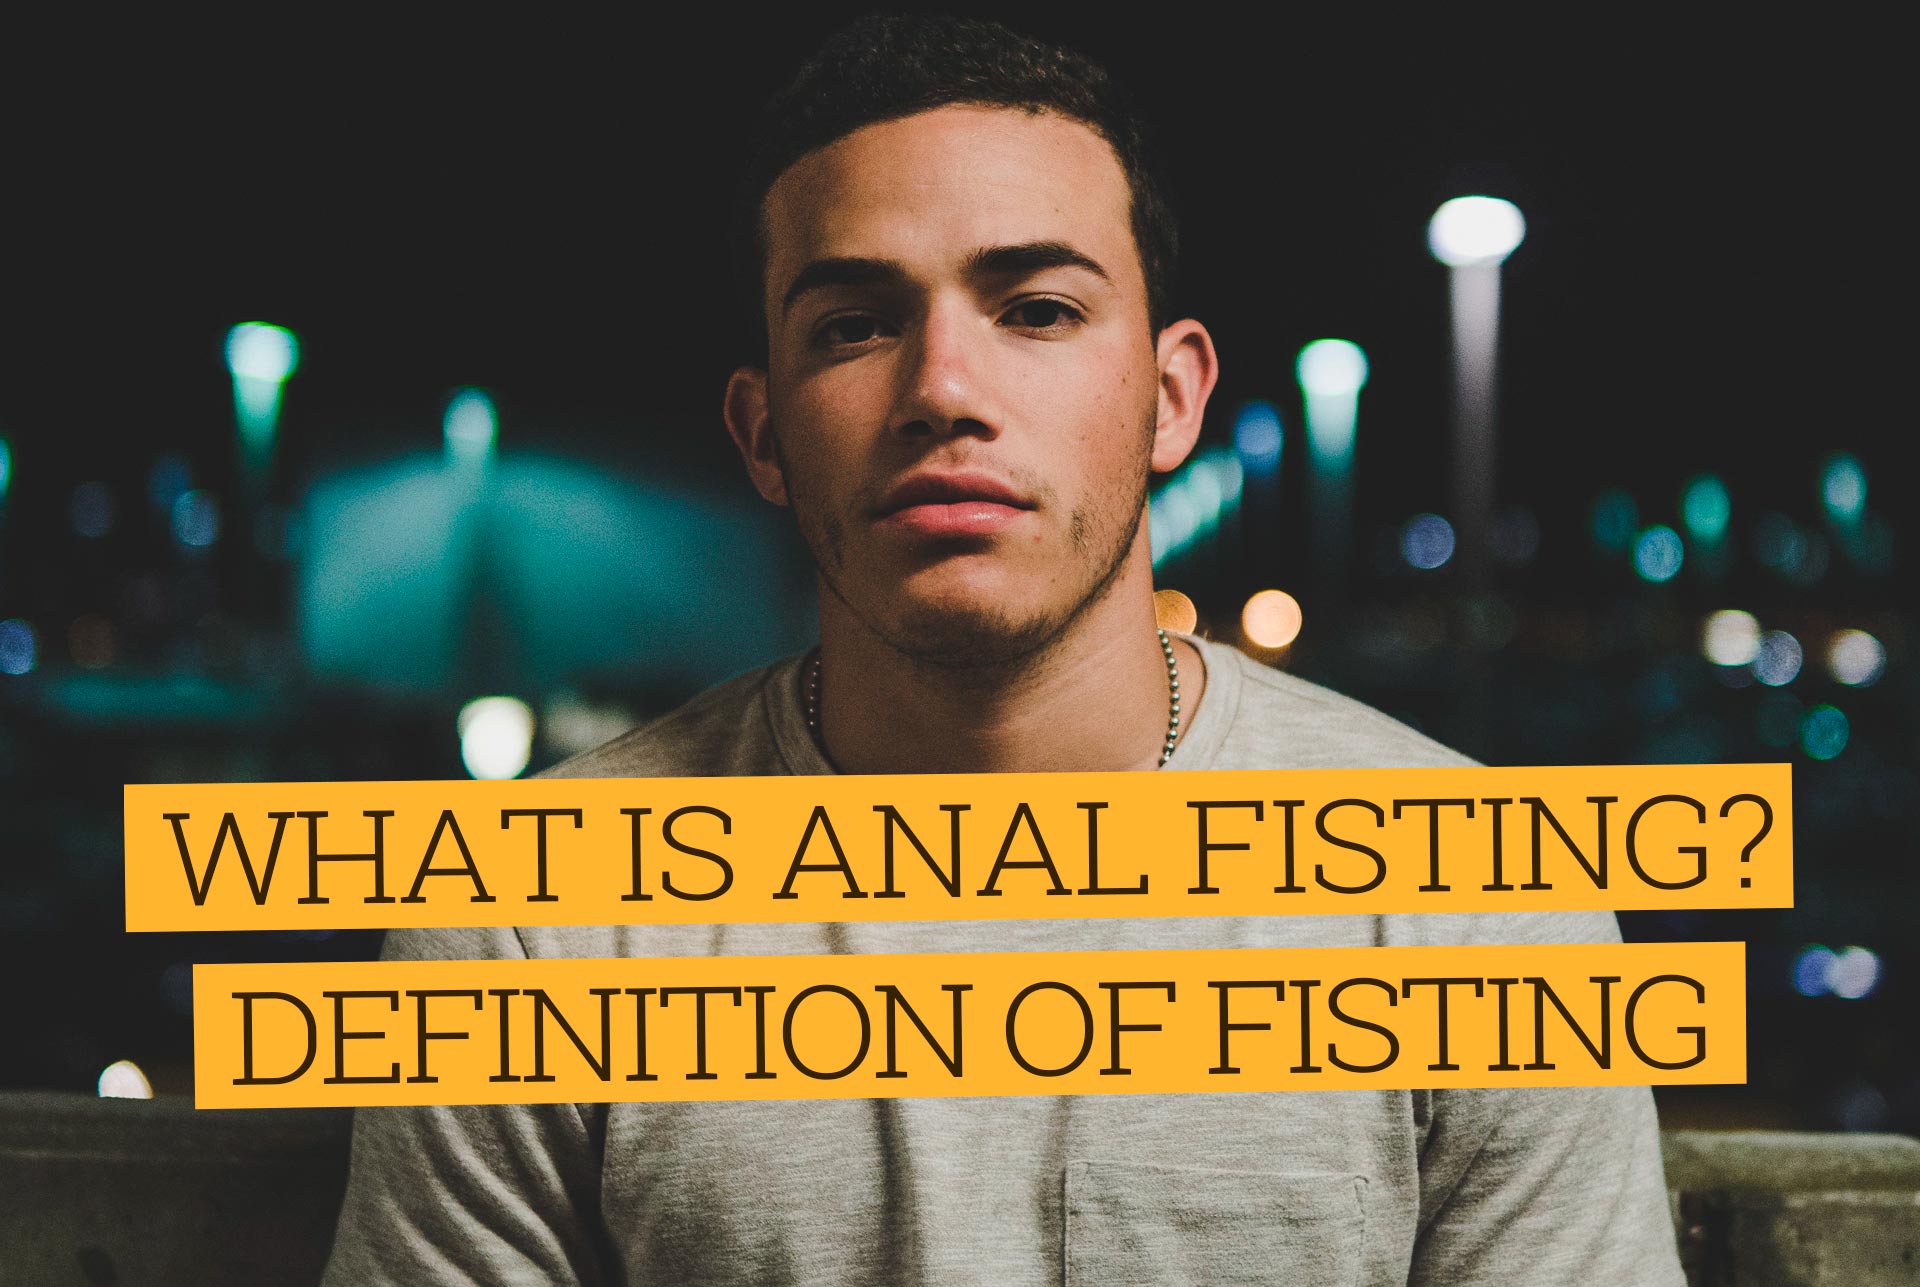 Definition of Anal Fisting